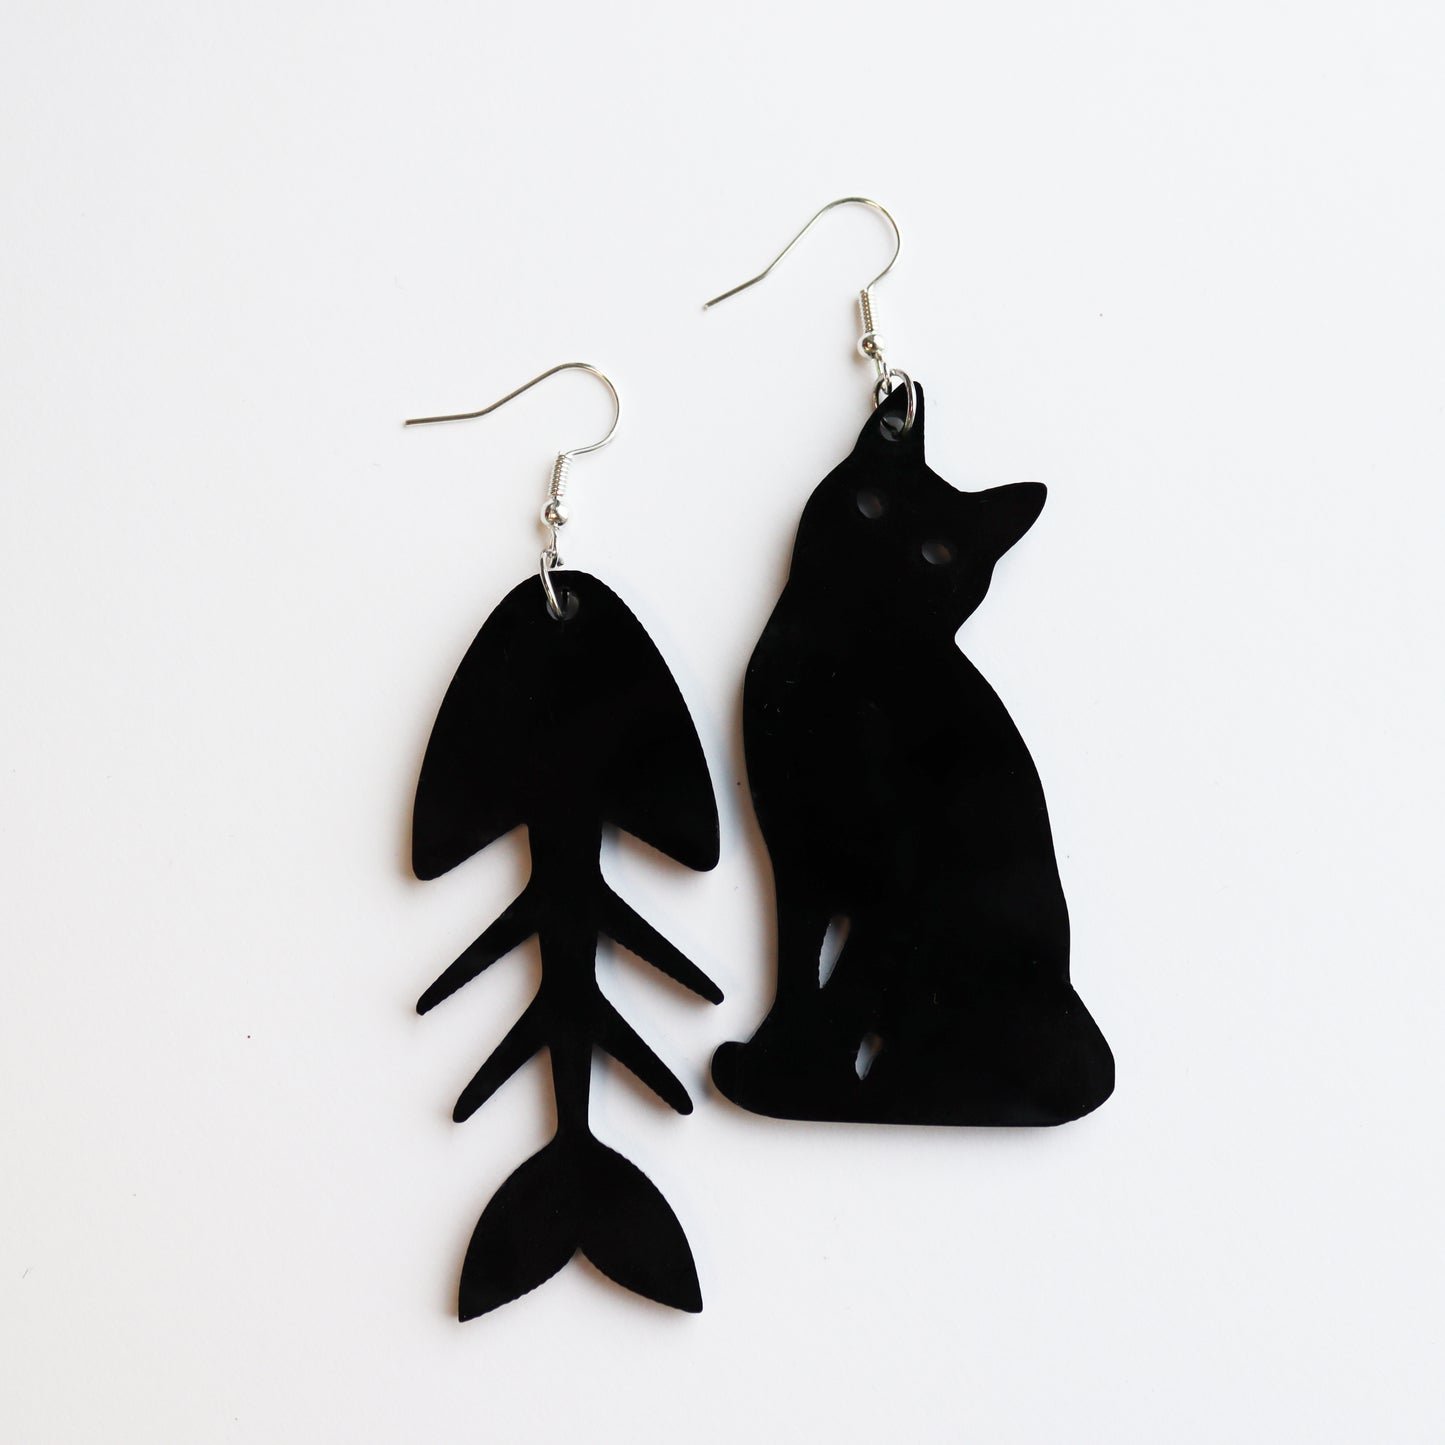 black cat and fish bone mismatches earrings cut from black acrylic with the bone earring on white background